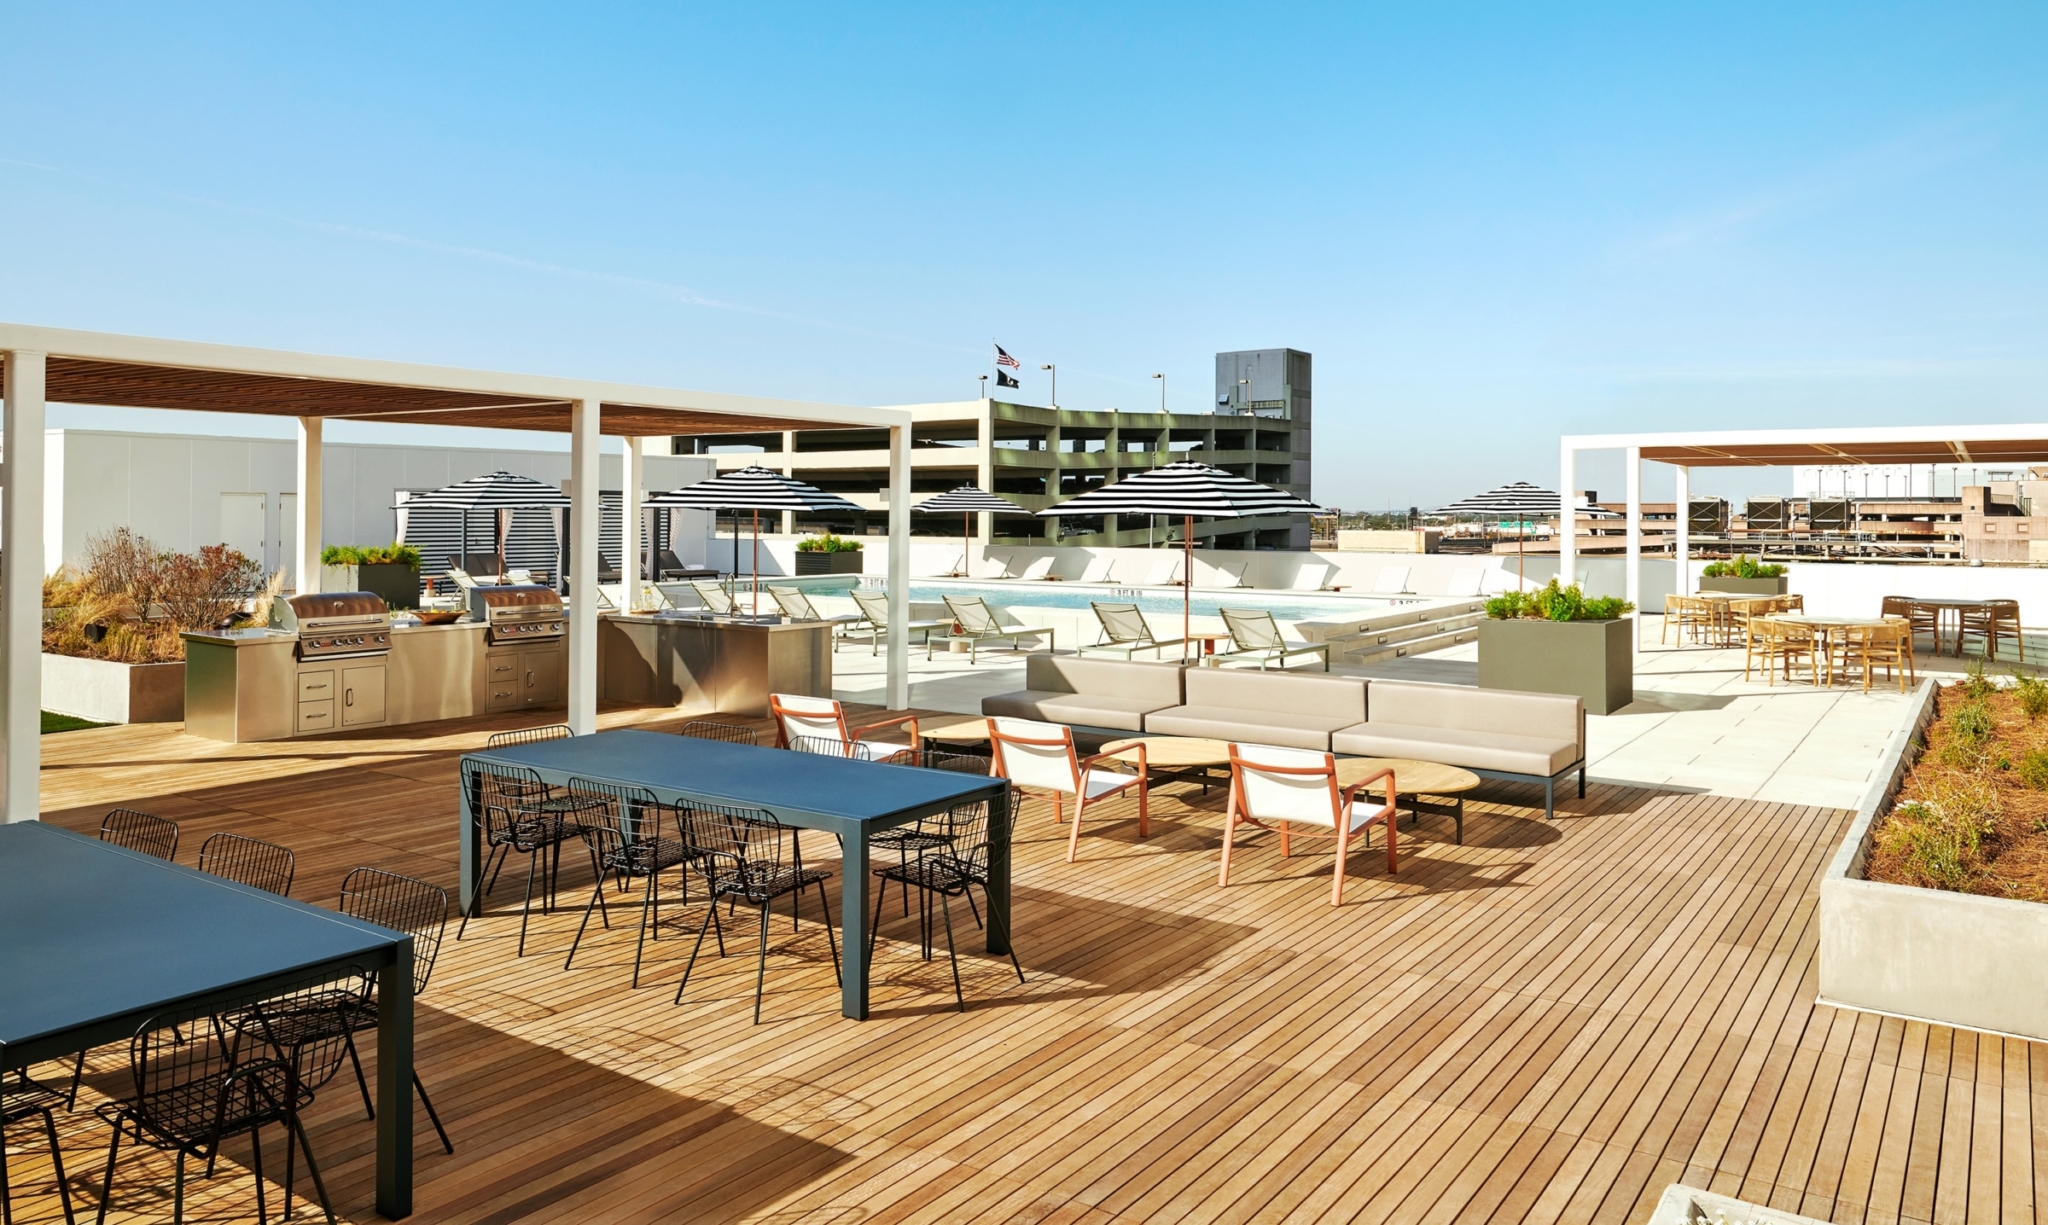 The Odeon rooftop deck with pool-side seating and other tables perfect for connecting and playing games.